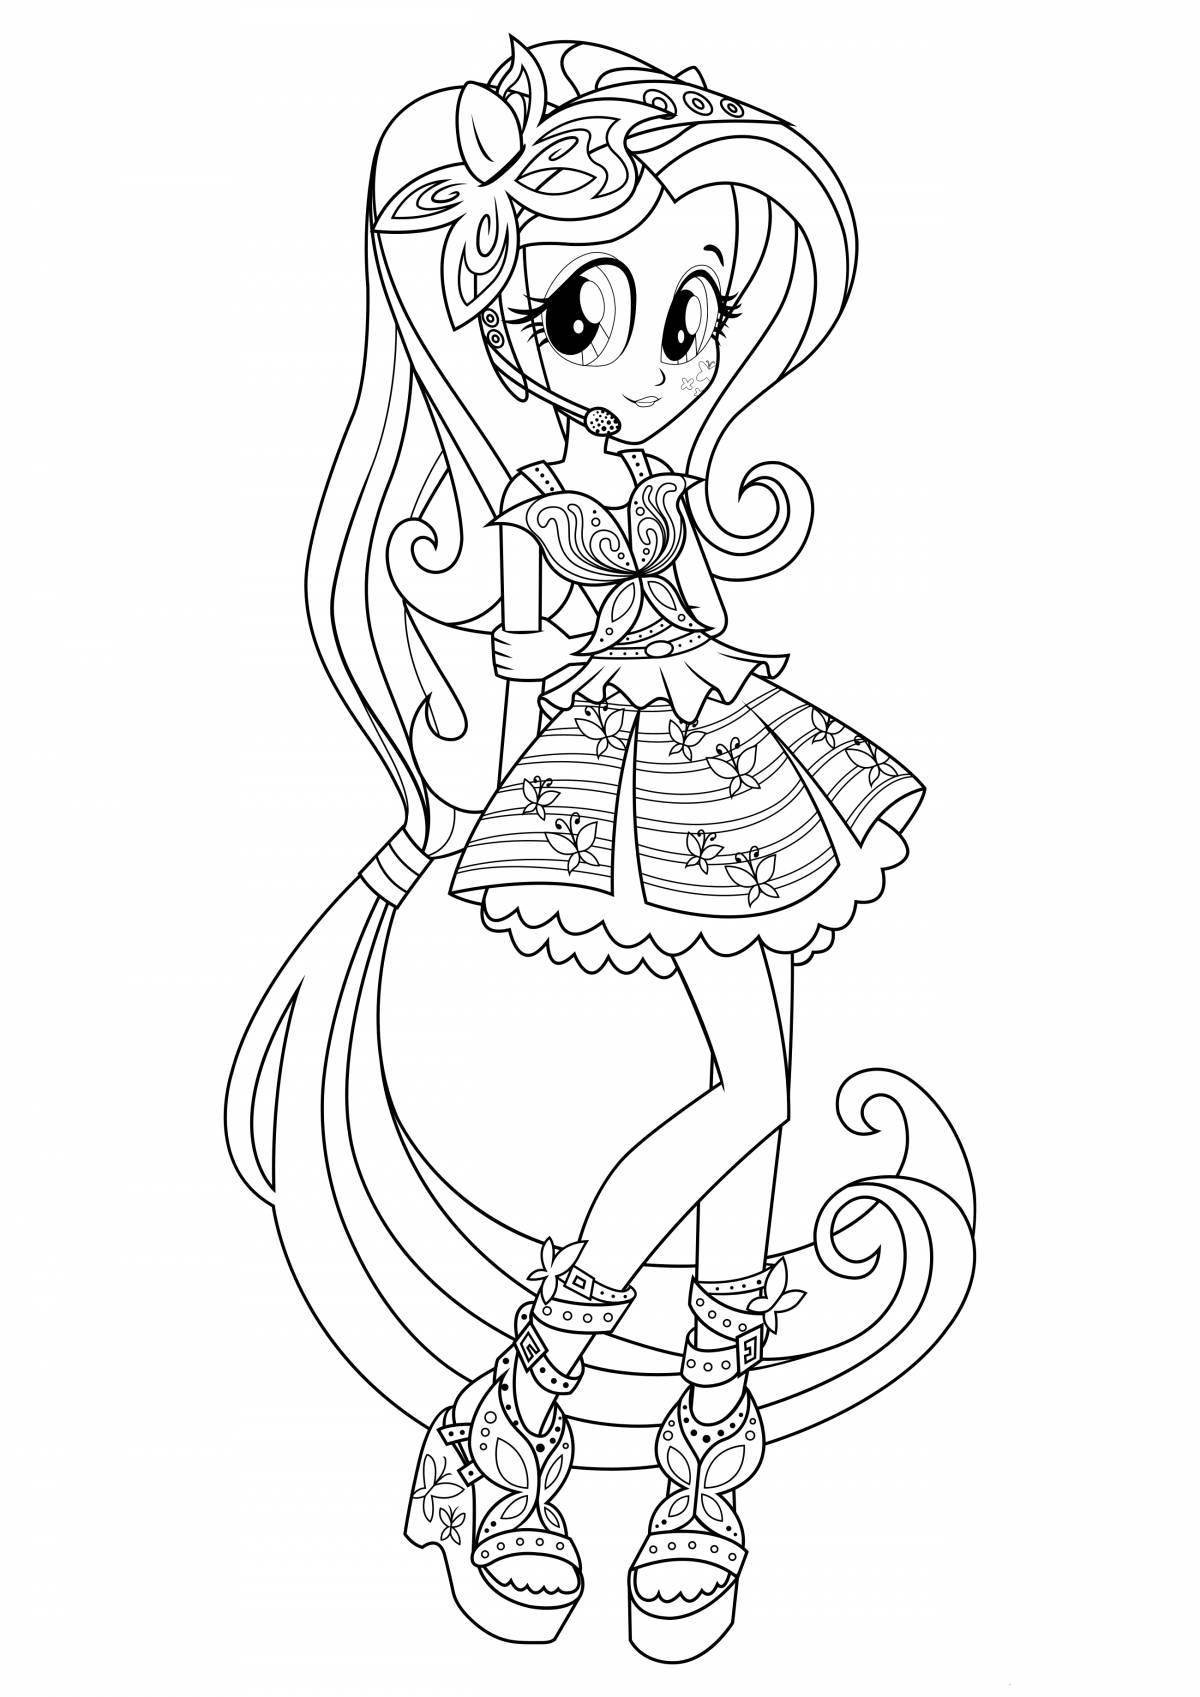 Equestria Girls Rainbow Dash Animated Coloring Page